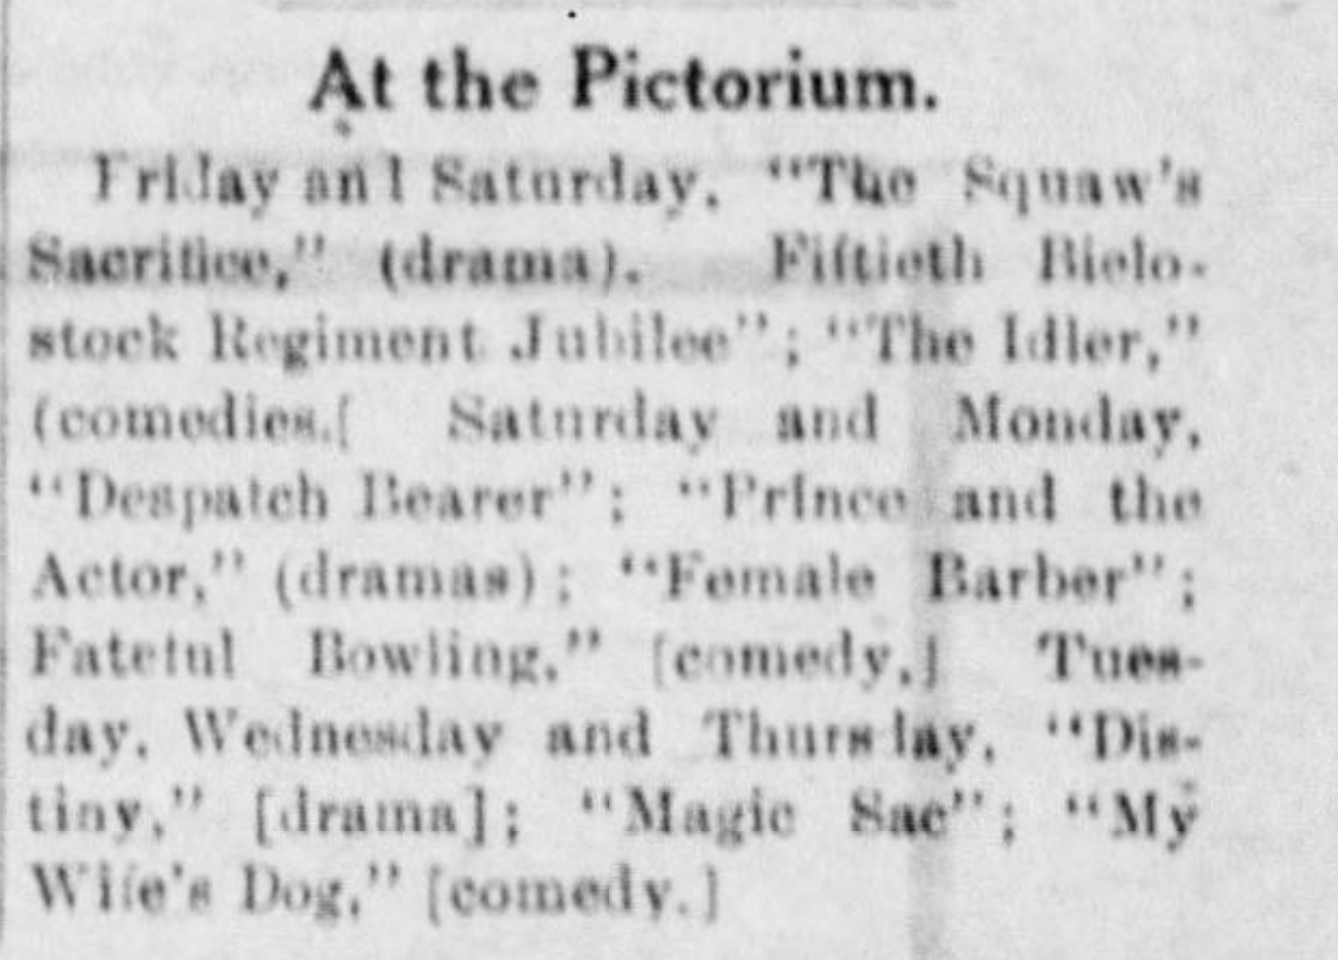 List of films showing at the Pictorium